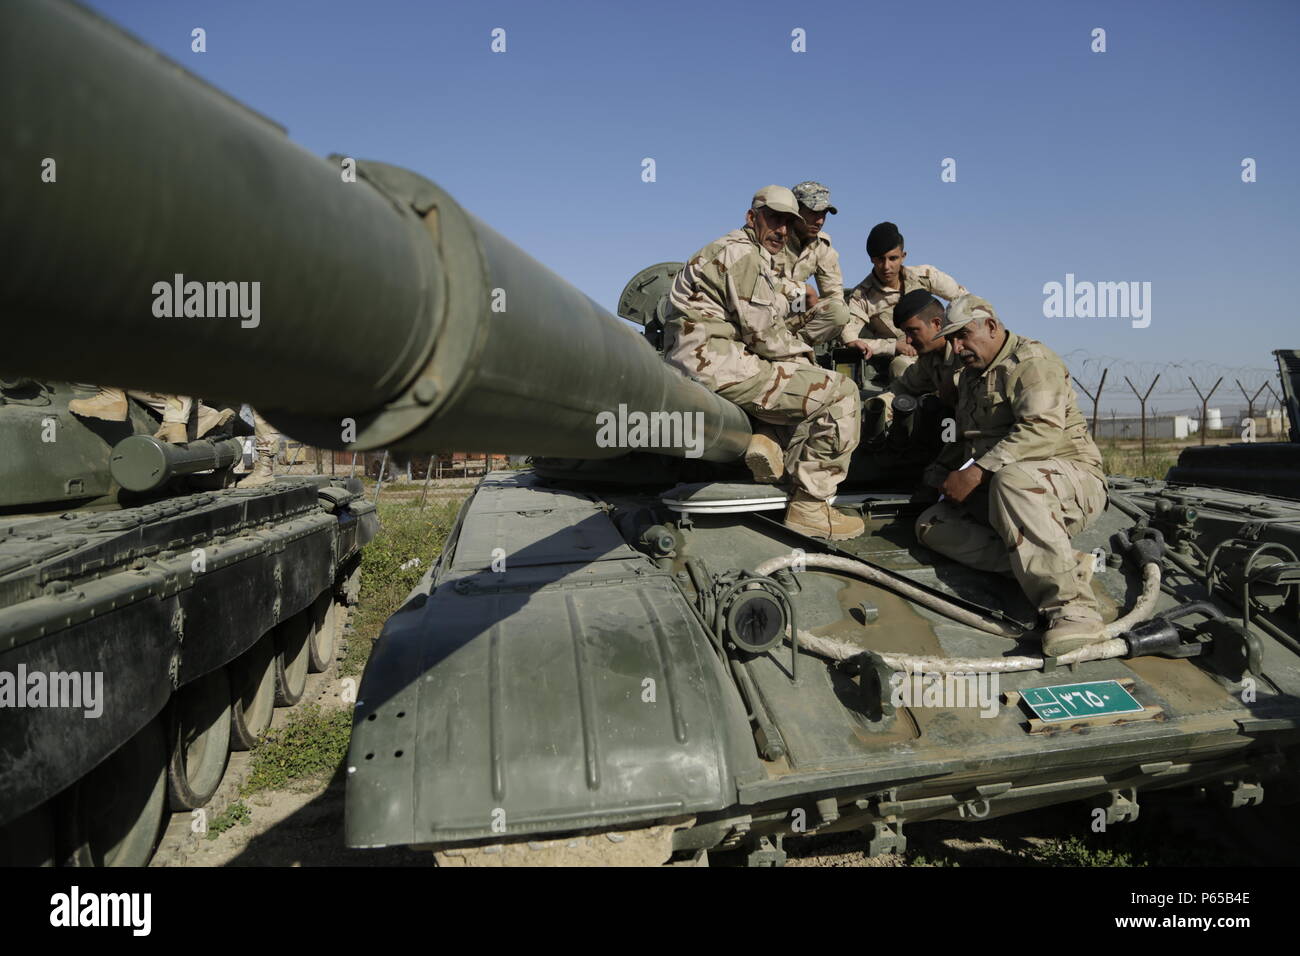 Iraqi Soldiers With 2nd Battalion 35th Iraqi Army Brigade Listen To T 72 Tank Driver S Compartment Instruction During Familiarization Training At The Besmaya Range Complex Iraq April 5 16 Tank Familiarization Is The